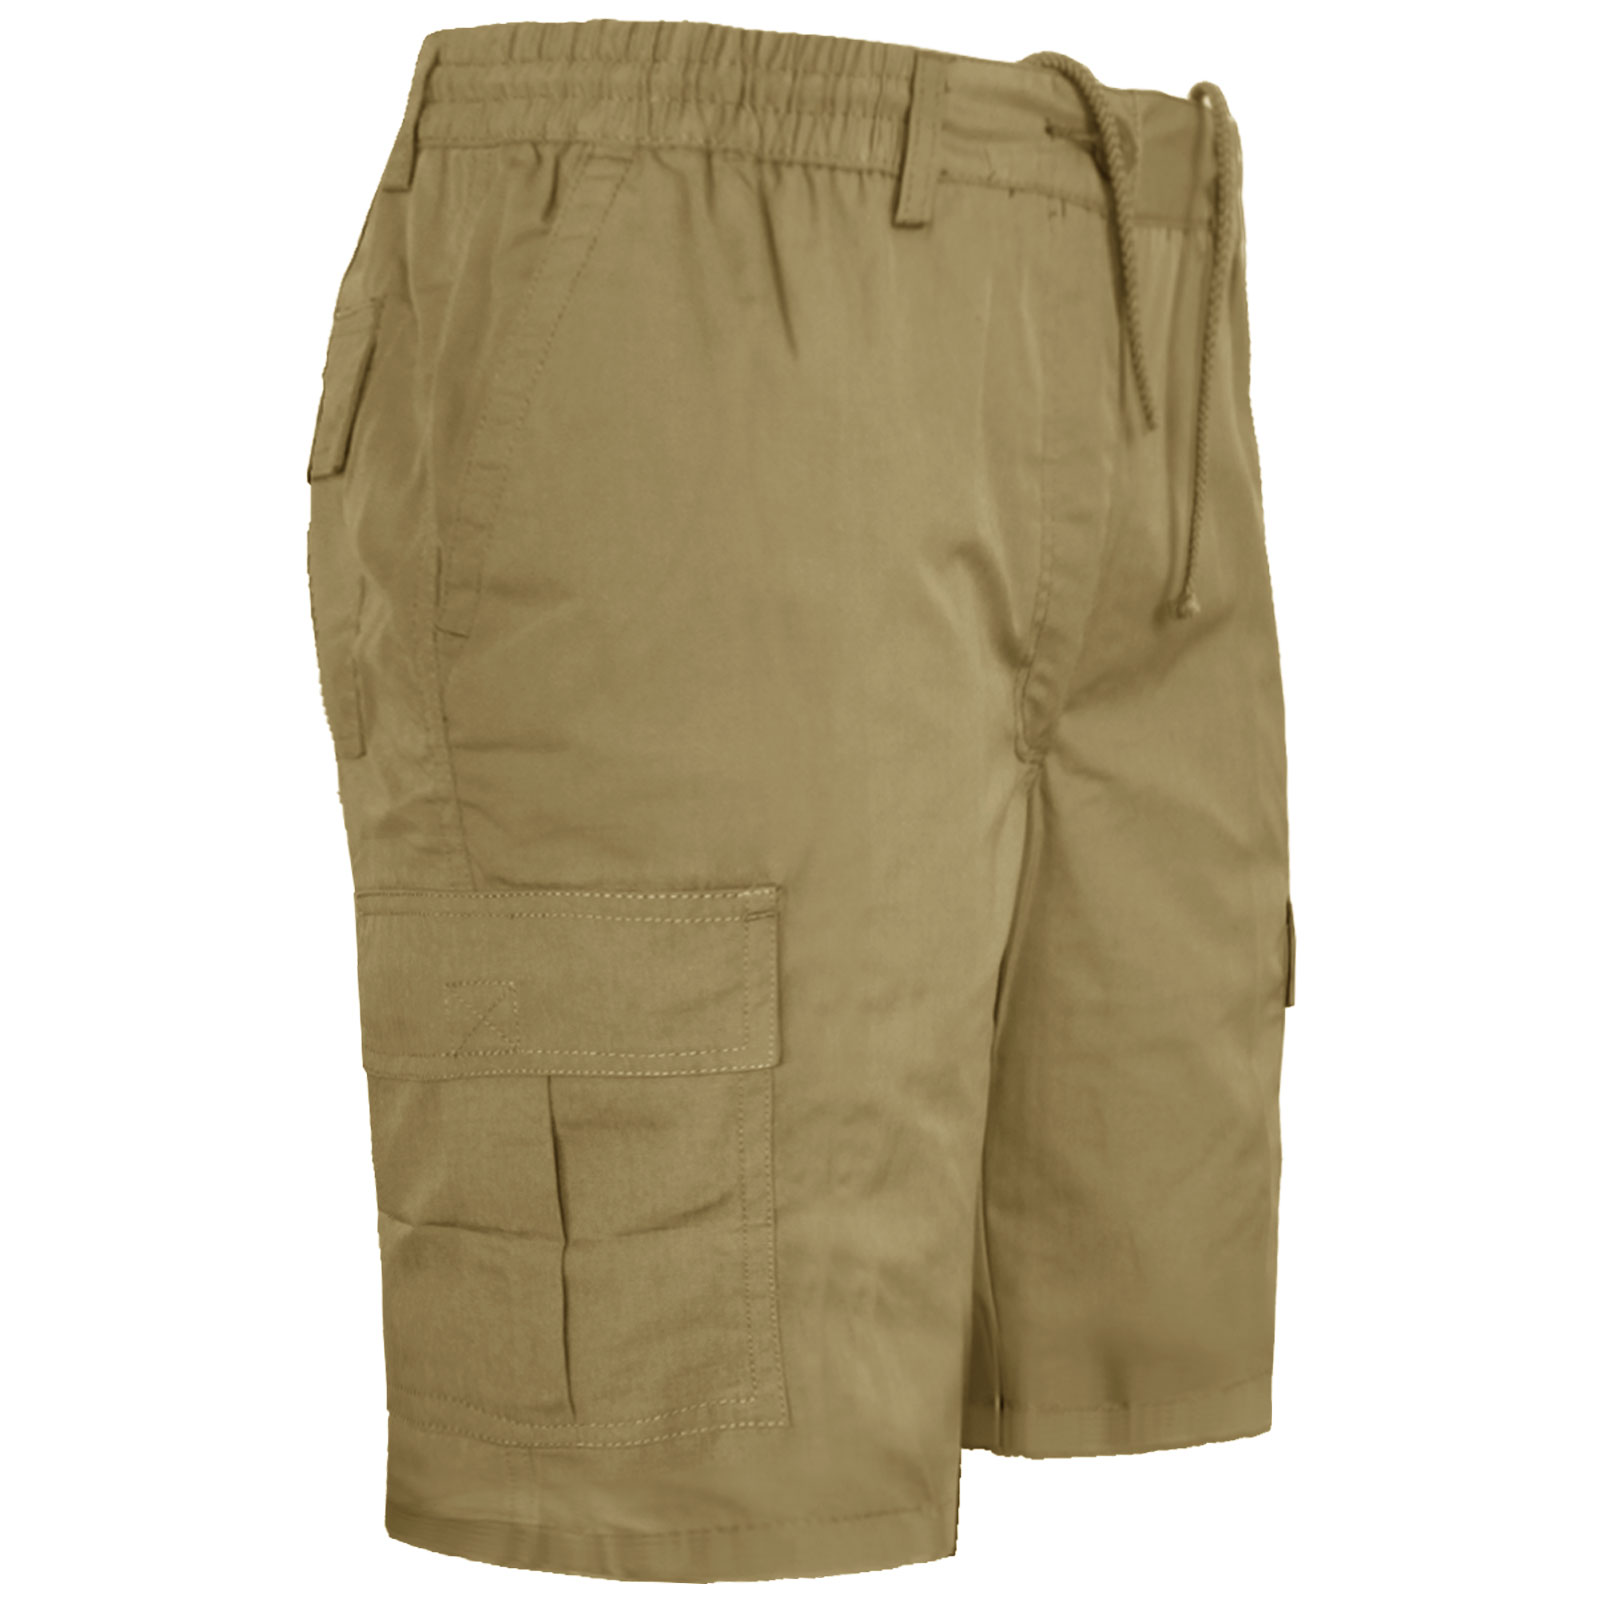 Mens Cargo Combat Shorts With Multi Pockets Elasticated Waist Small To 5XL 